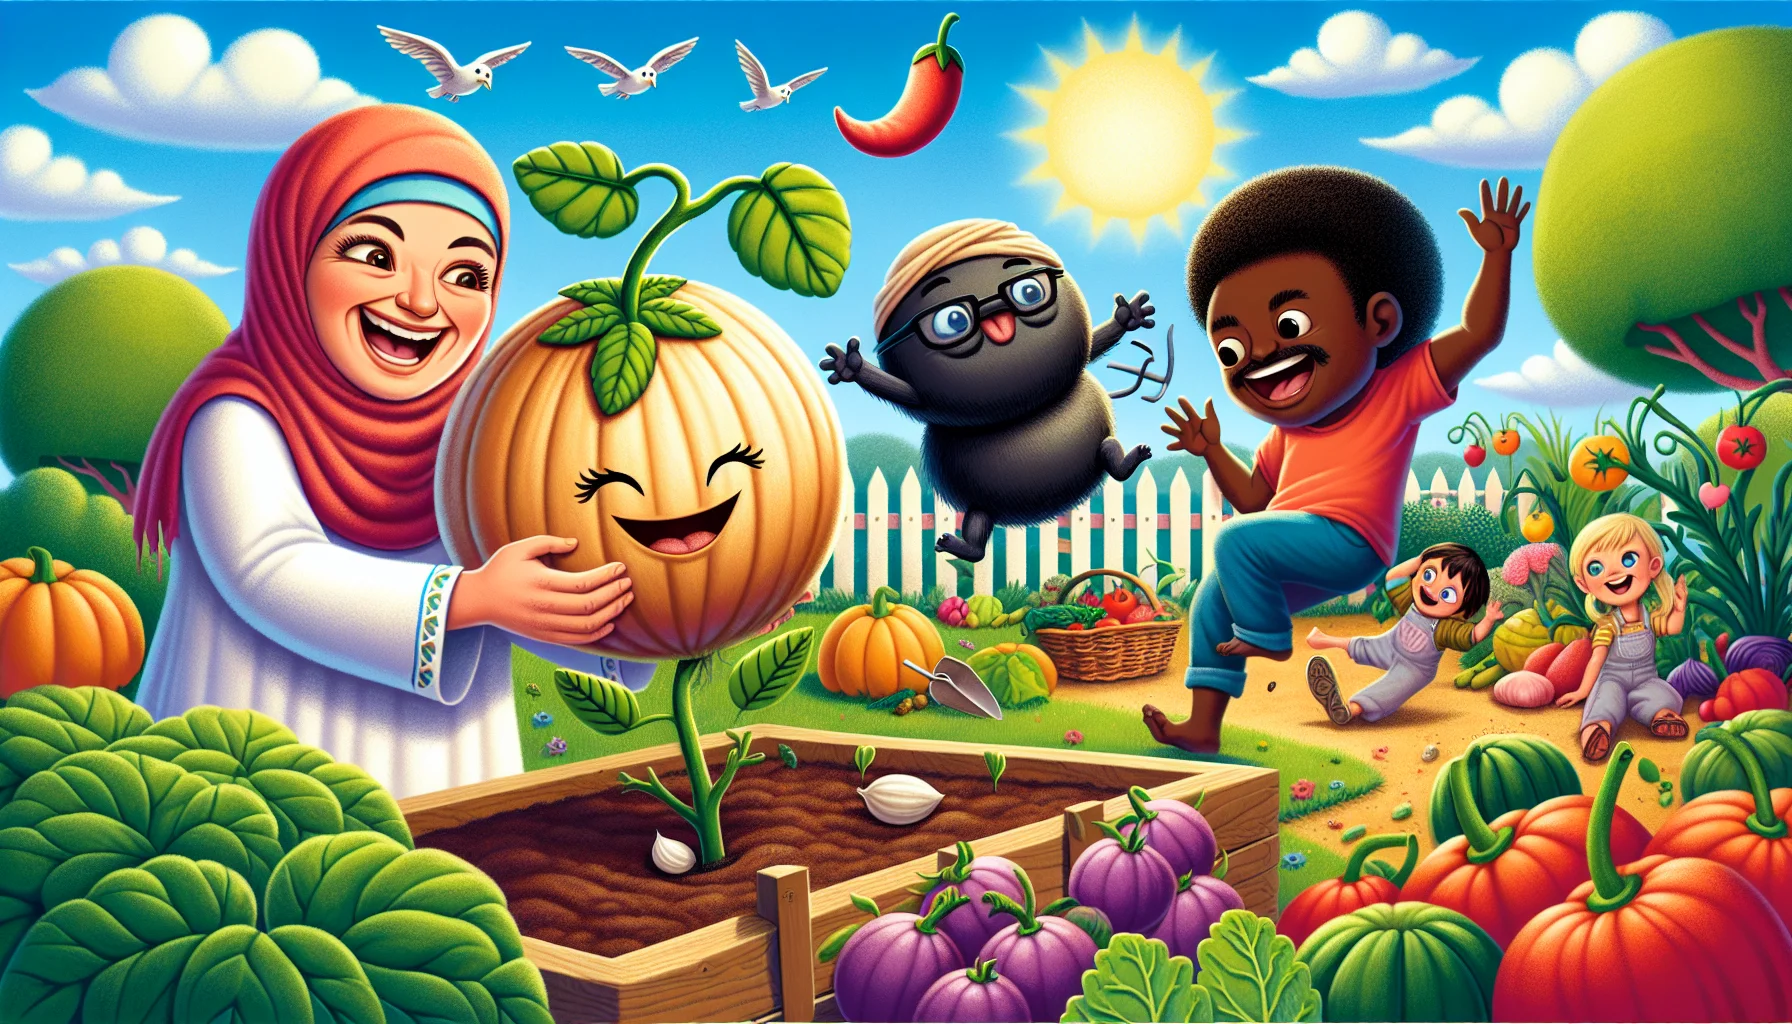 Craft a scene in a realistic style that humorously emphasizes the joy of gardening, featuring a ripe percinnamon. Picture this; there's a Middle-Eastern woman cheerfully planting a percinnamon seed, while a Caucasian man is comically chasing a perky percinnamon that's furtively rolling away. A Black kid with curious eyes is giggling, holding a percinnamon plant with a single-ripe percinnamon on it, as if it grew in no time. The summery blue sky overhead, chirping birds around, and the colorful variety of vegetables in the background creates a jolly atmosphere.